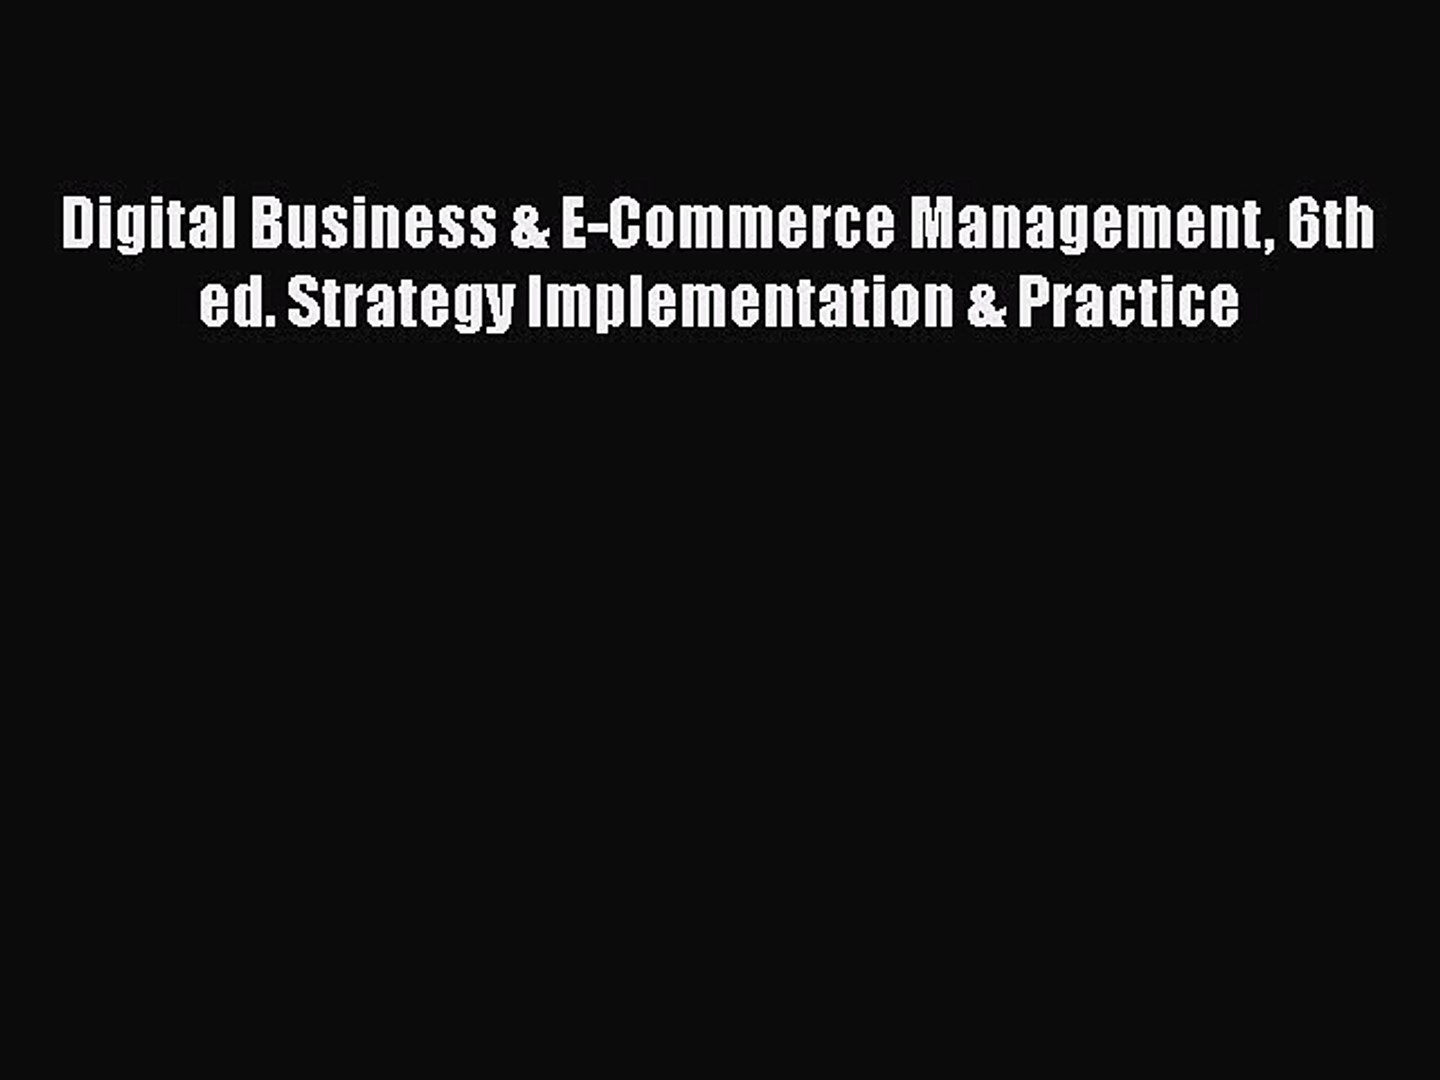 Digital Business and E-Commerce Management 6th Edition